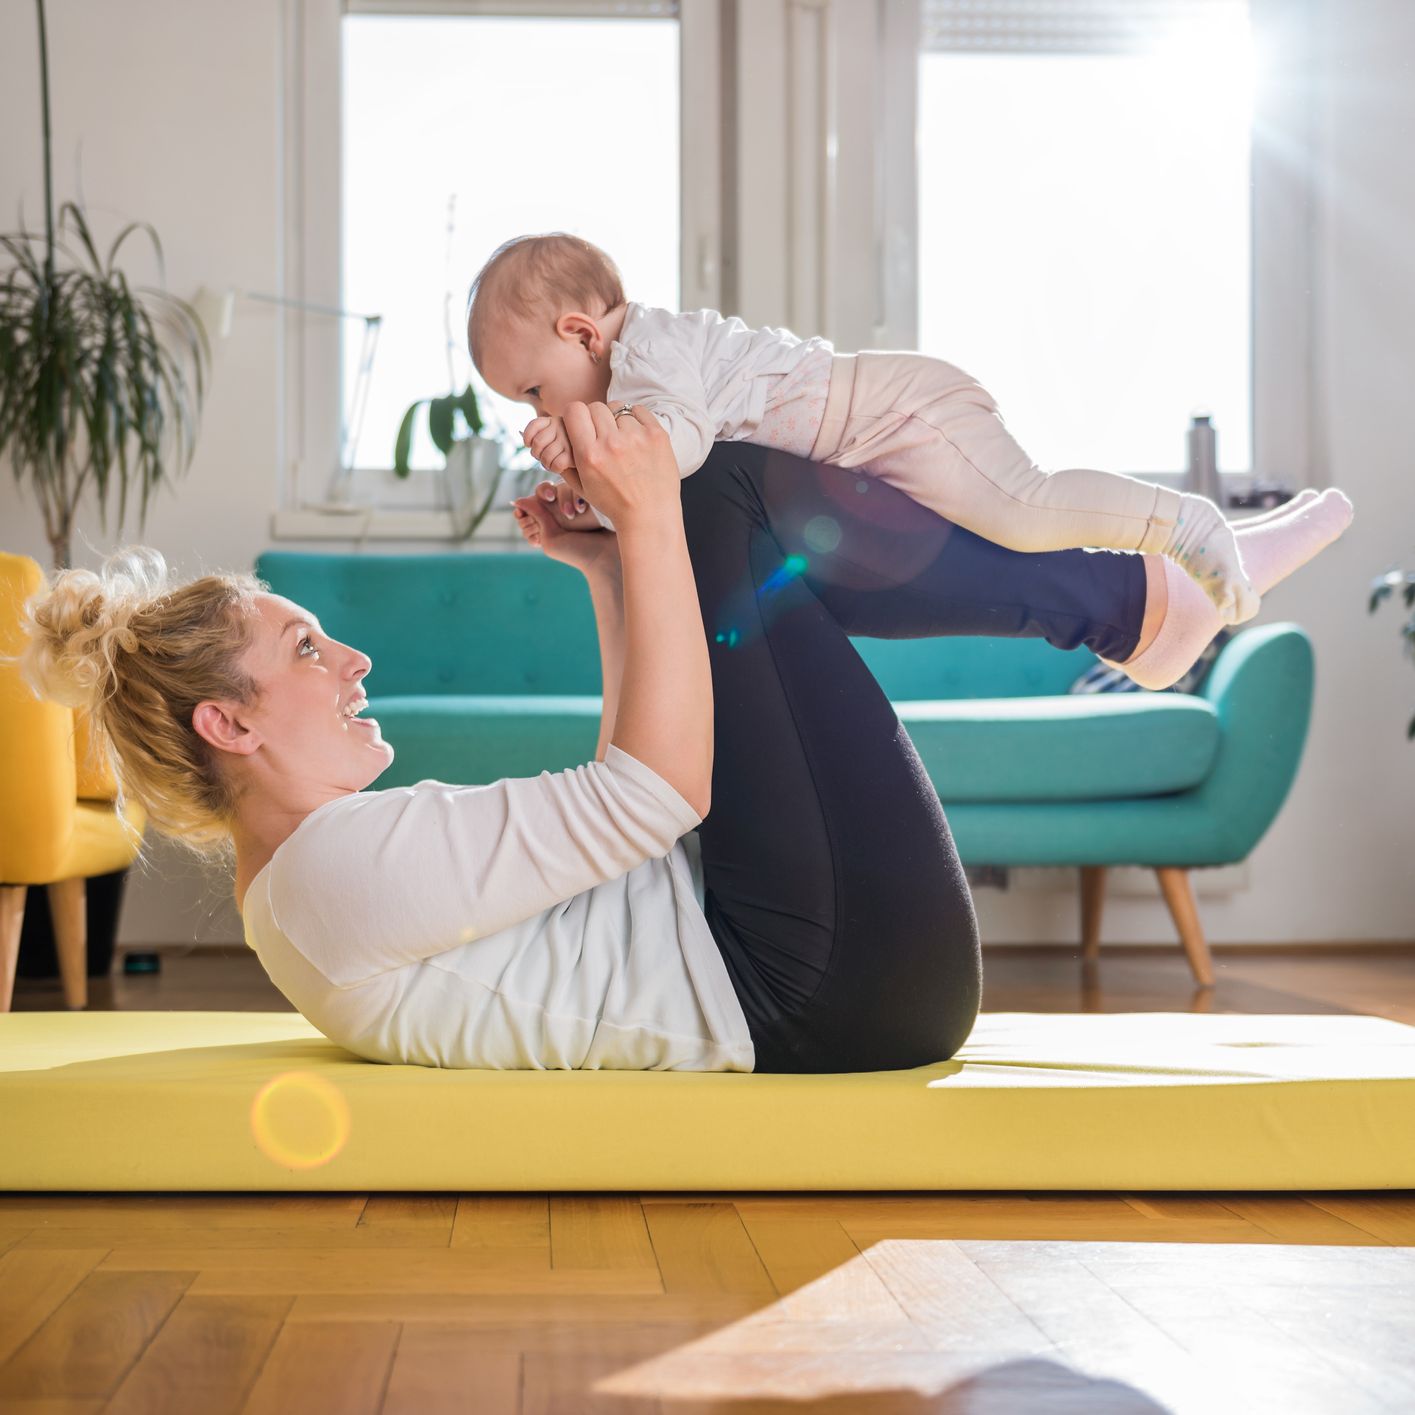 A 7-Move Postnatal Strength Workout to Steadily Build Up Strength